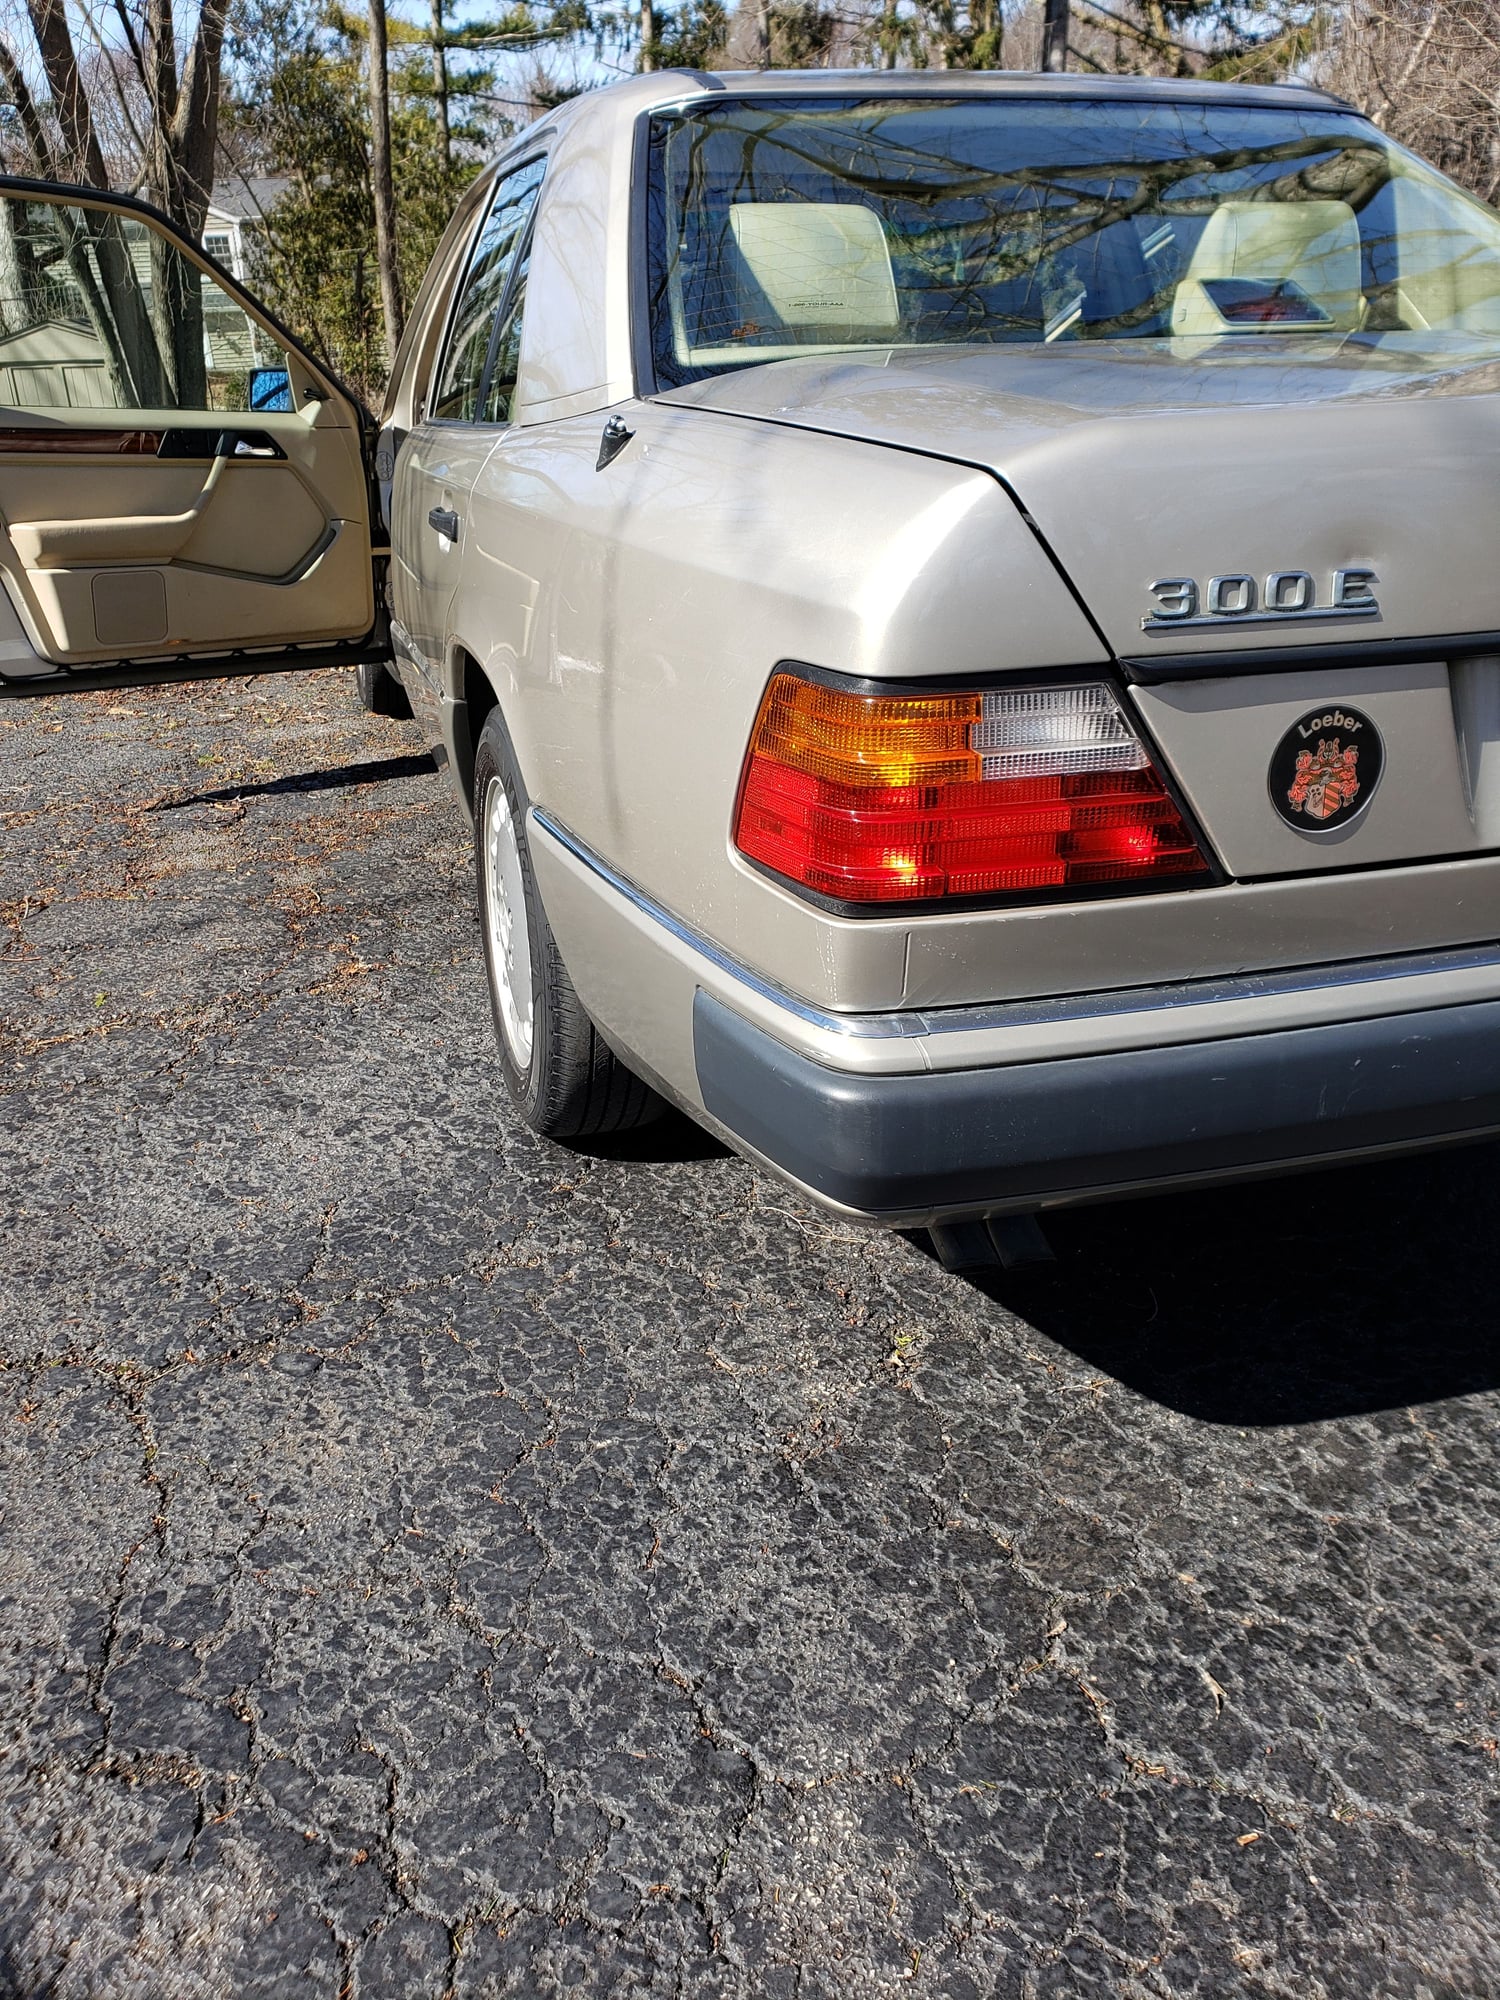 1992 Mercedes-Benz 300E - Low Miles on MB Classic - Used - VIN Wdbea26d1nb596044 - 137,000 Miles - 2 cyl - 2WD - Automatic - Sedan - Gold - Palatine, IL 60067, United States